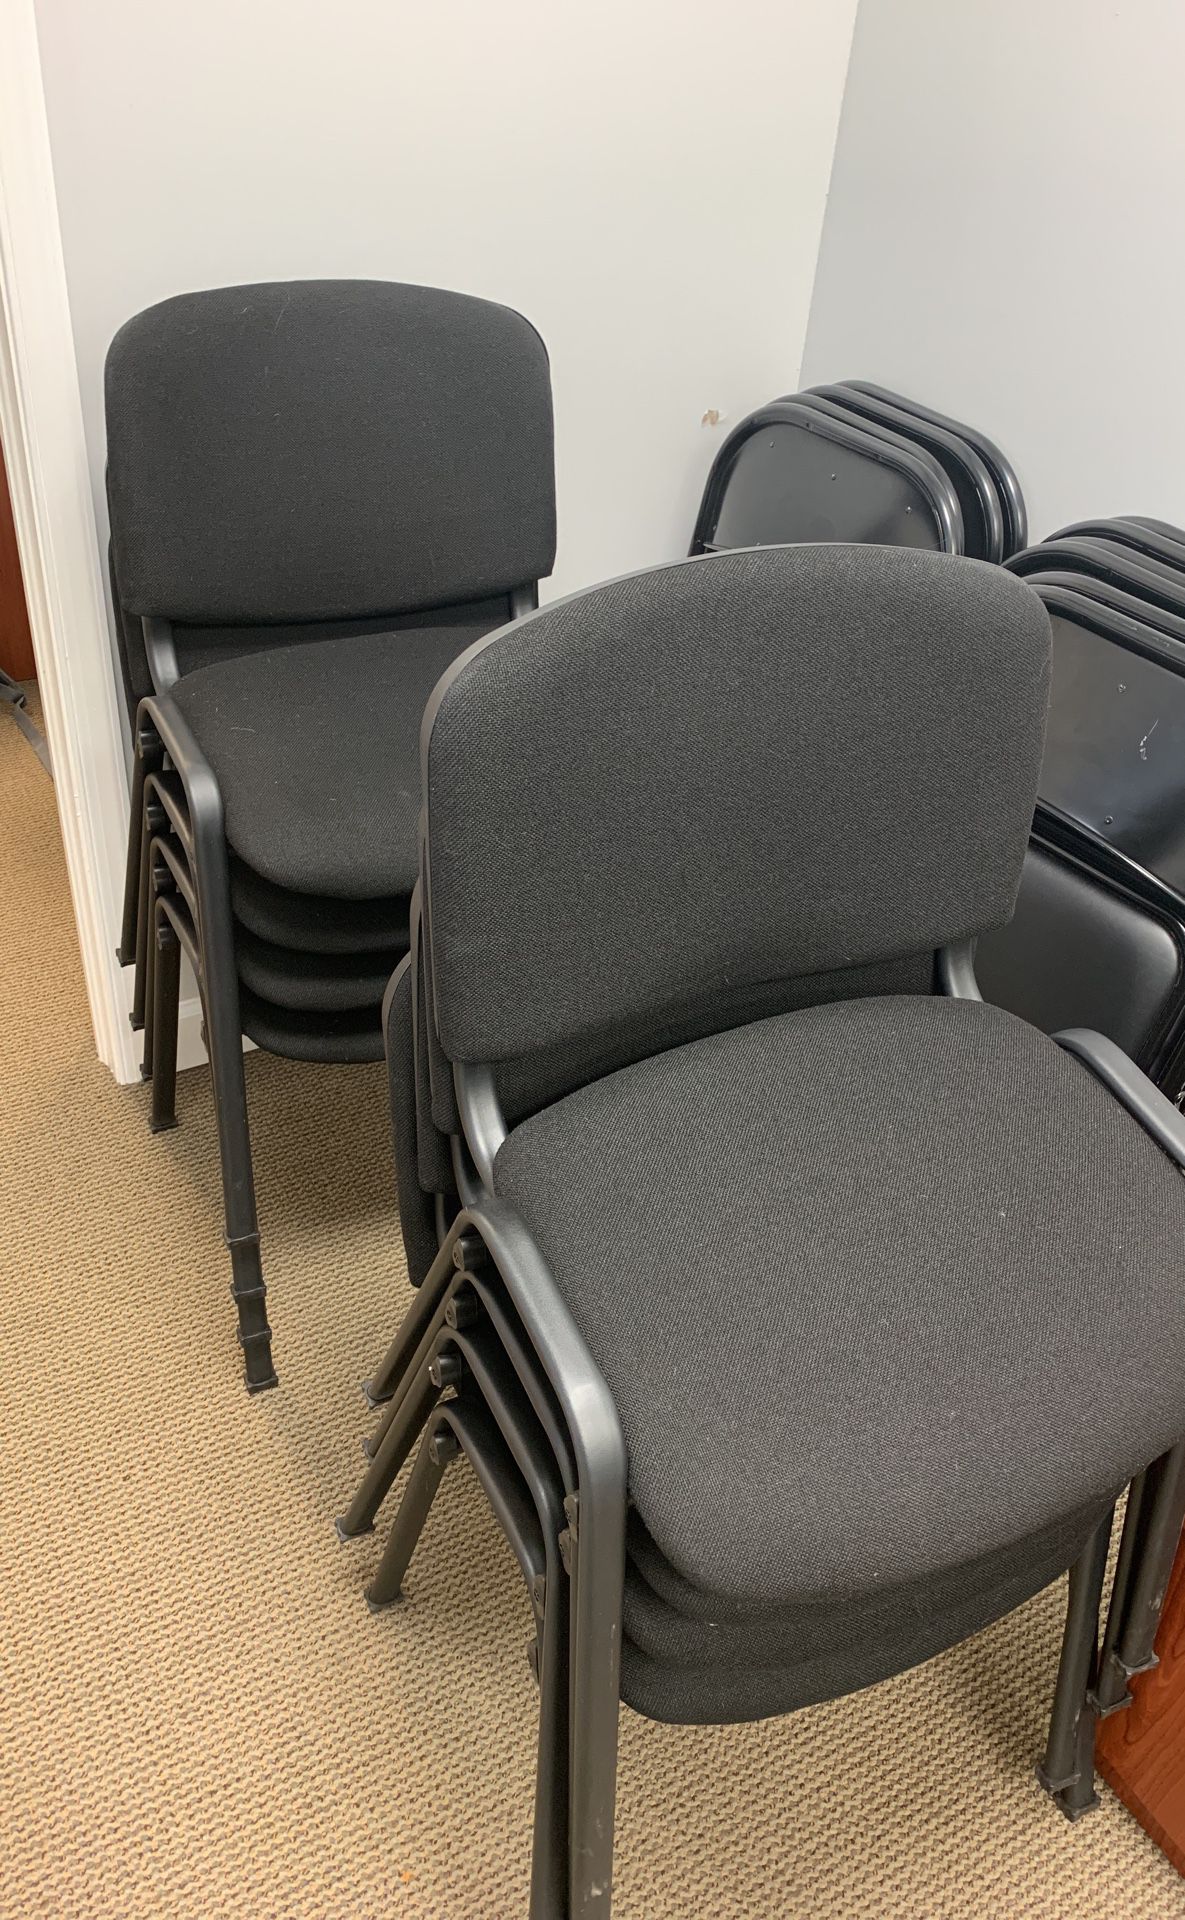 New office chairs for sale! (8)